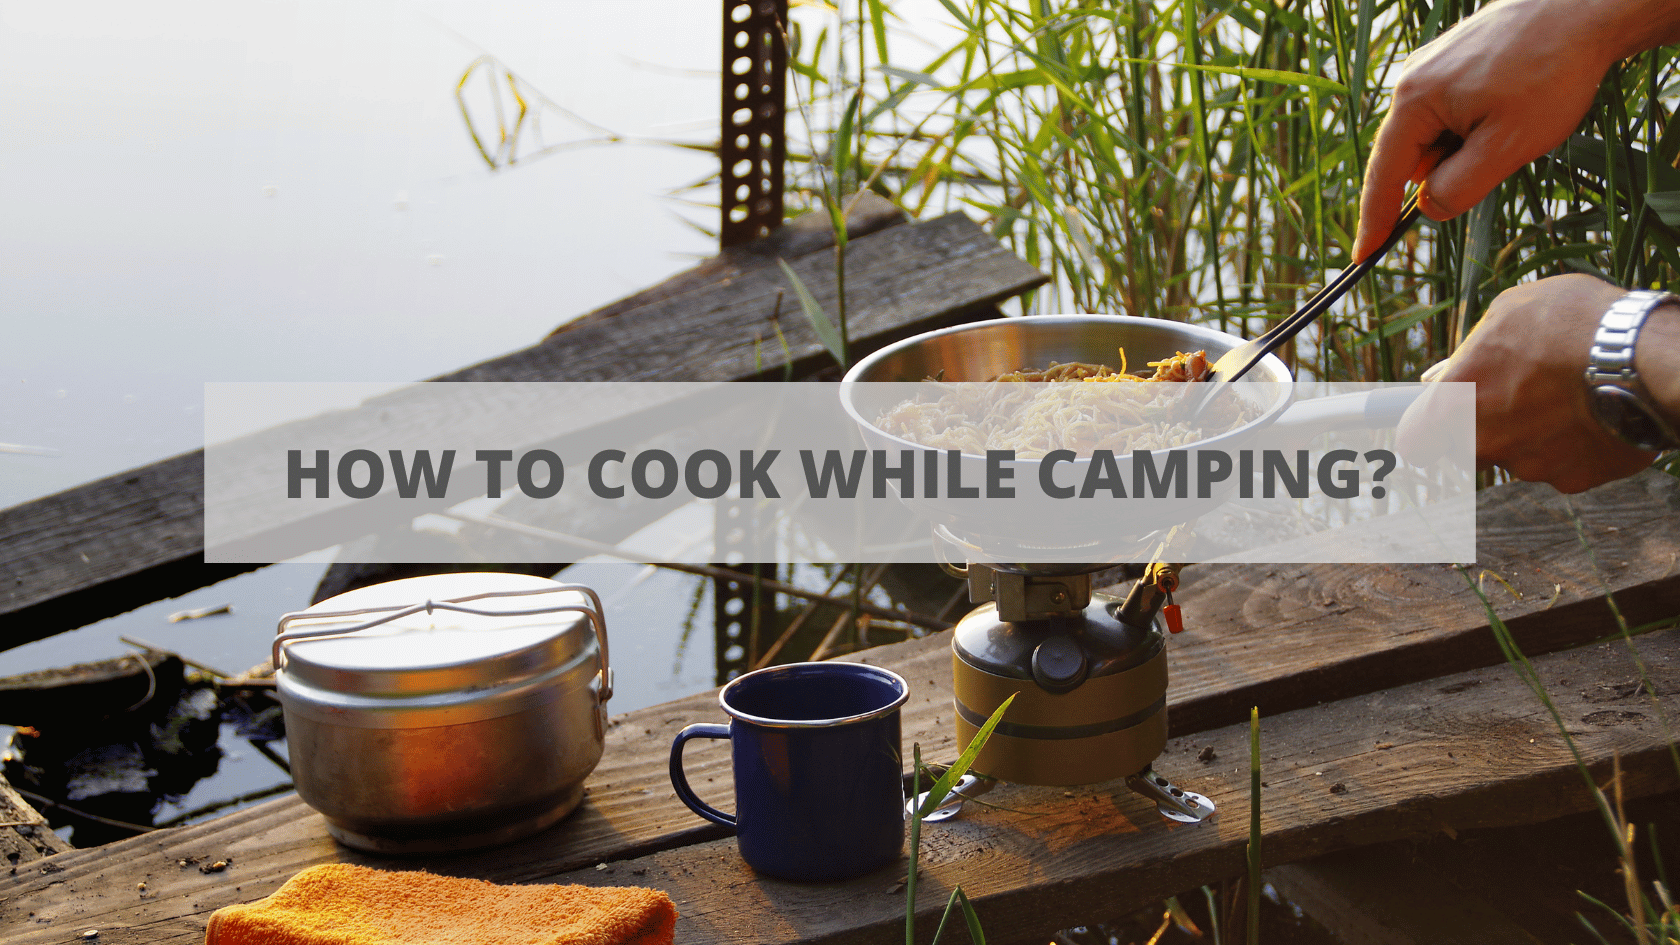 How To Cook While Camping 2 